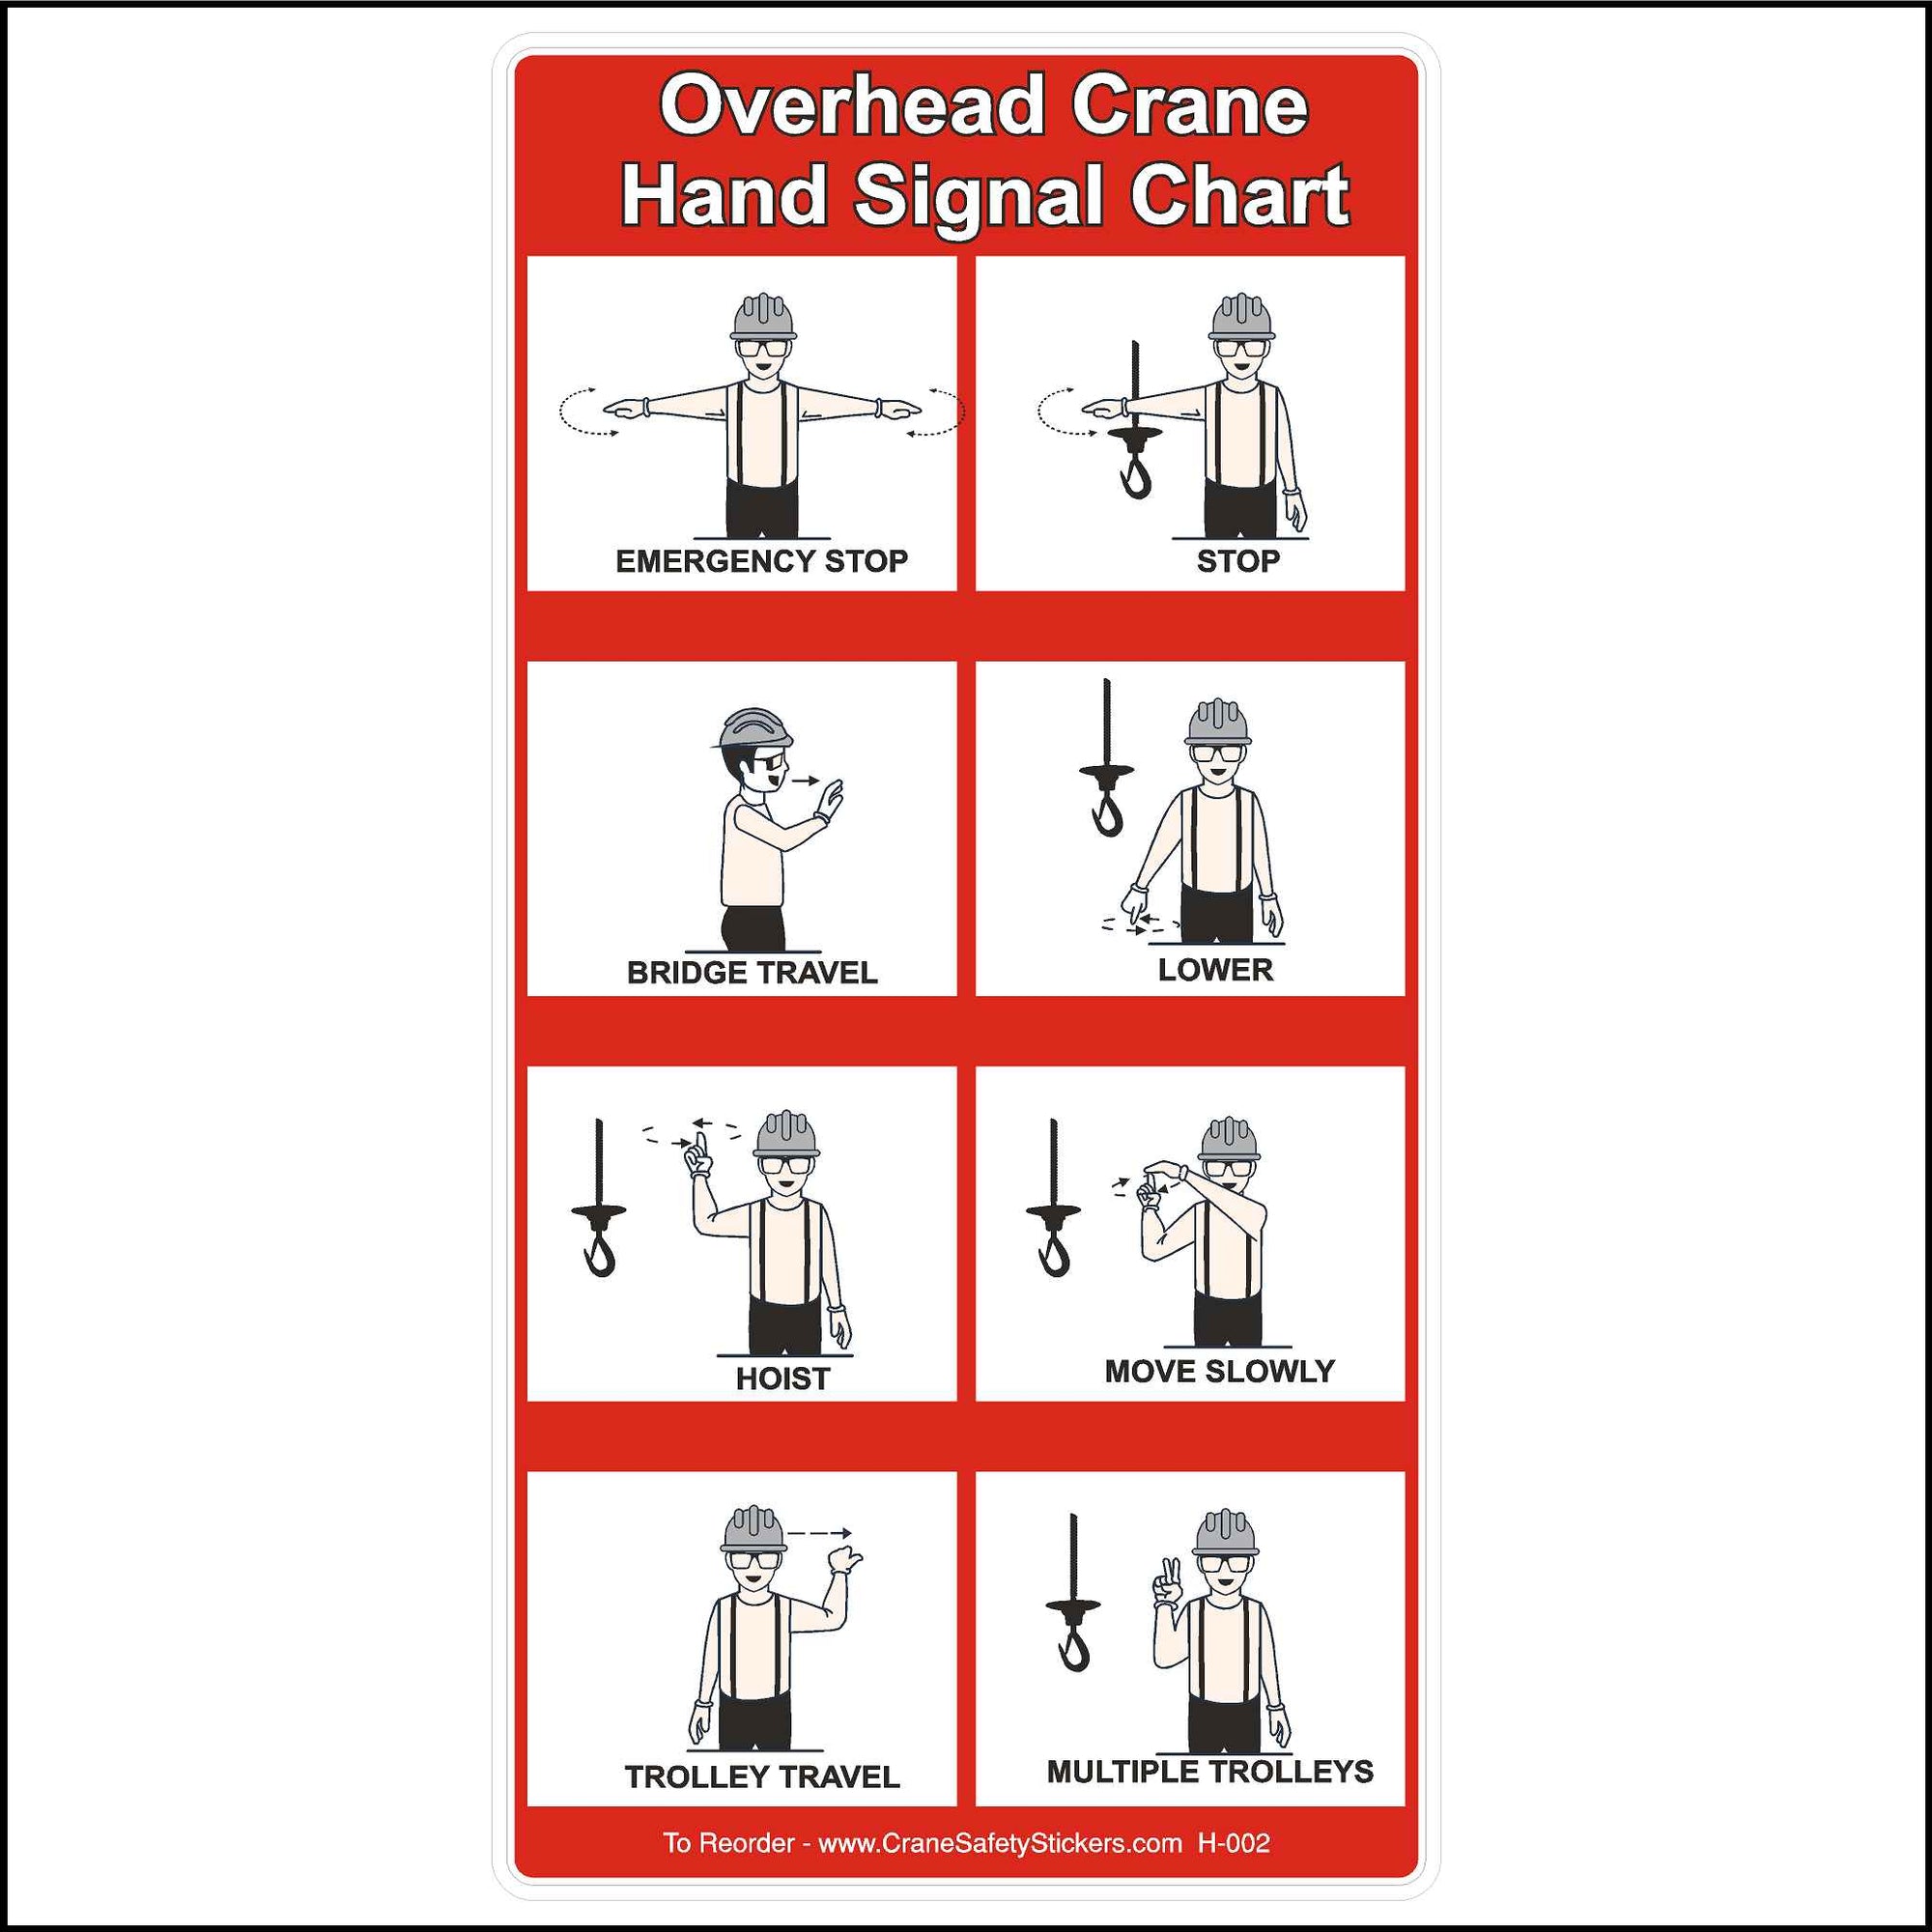 Overhead Crane Hand Signal Chart with all hand signals. 6 inches by 12 inches in size.